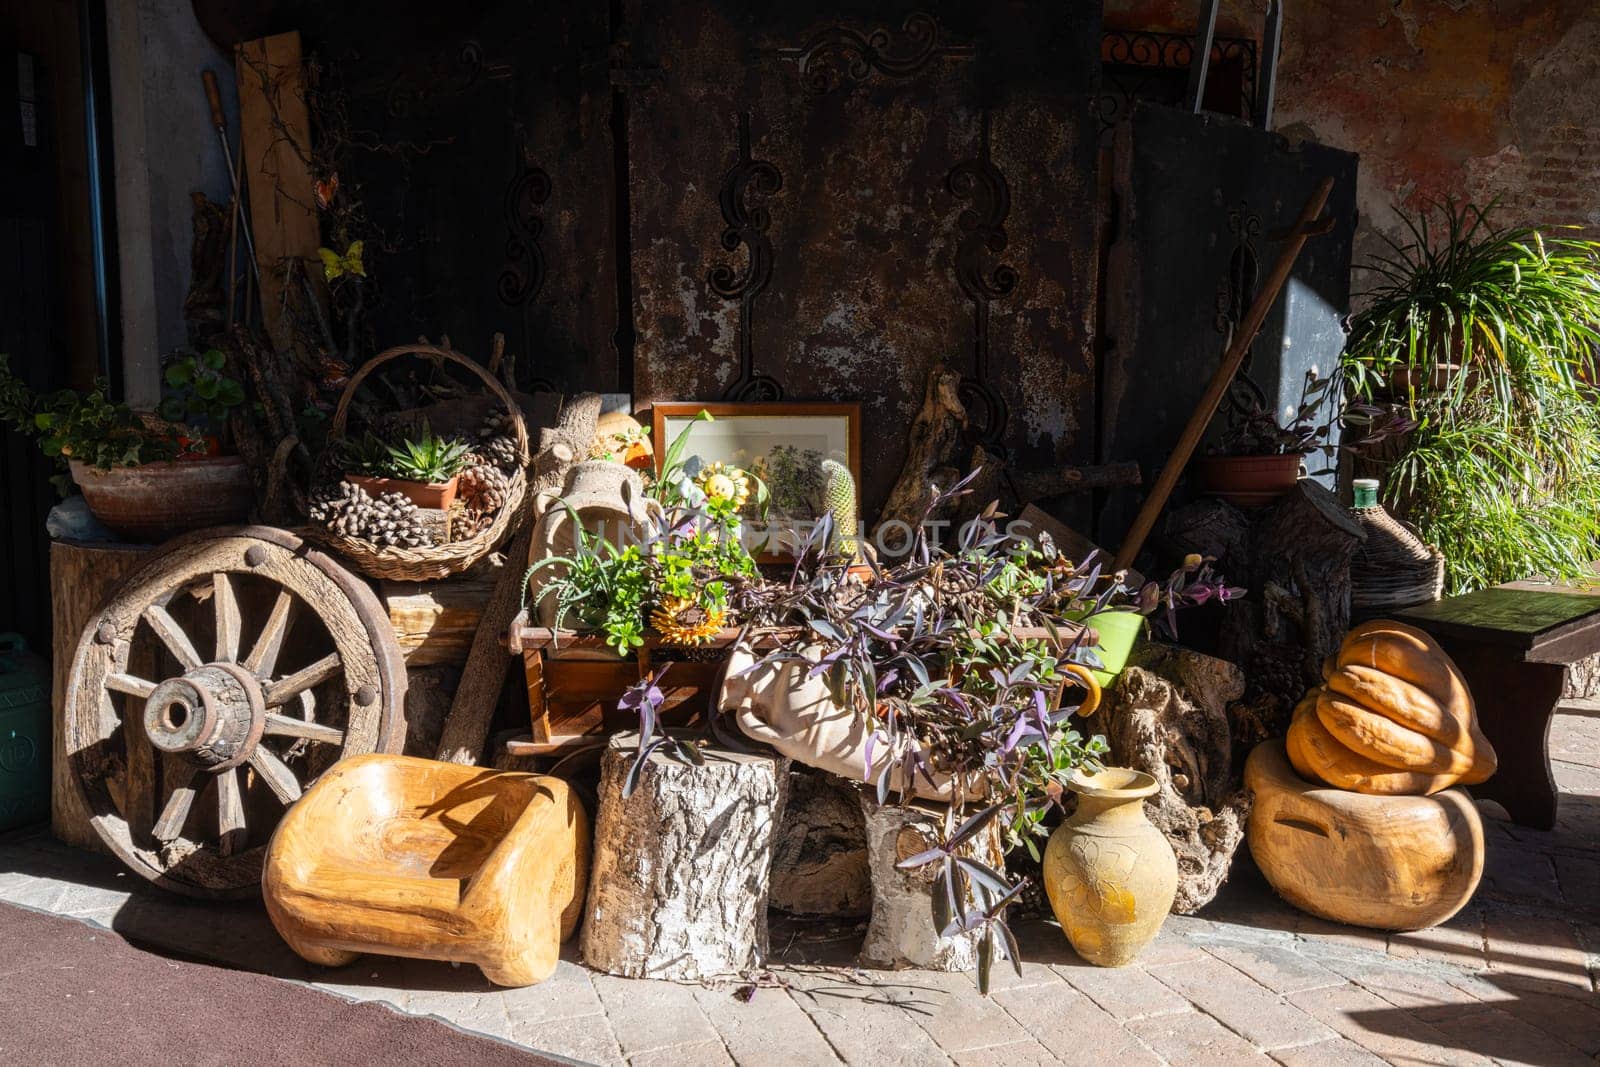 Ancient objects and plants collected outside a courtyard of an old rural house in northern Italy